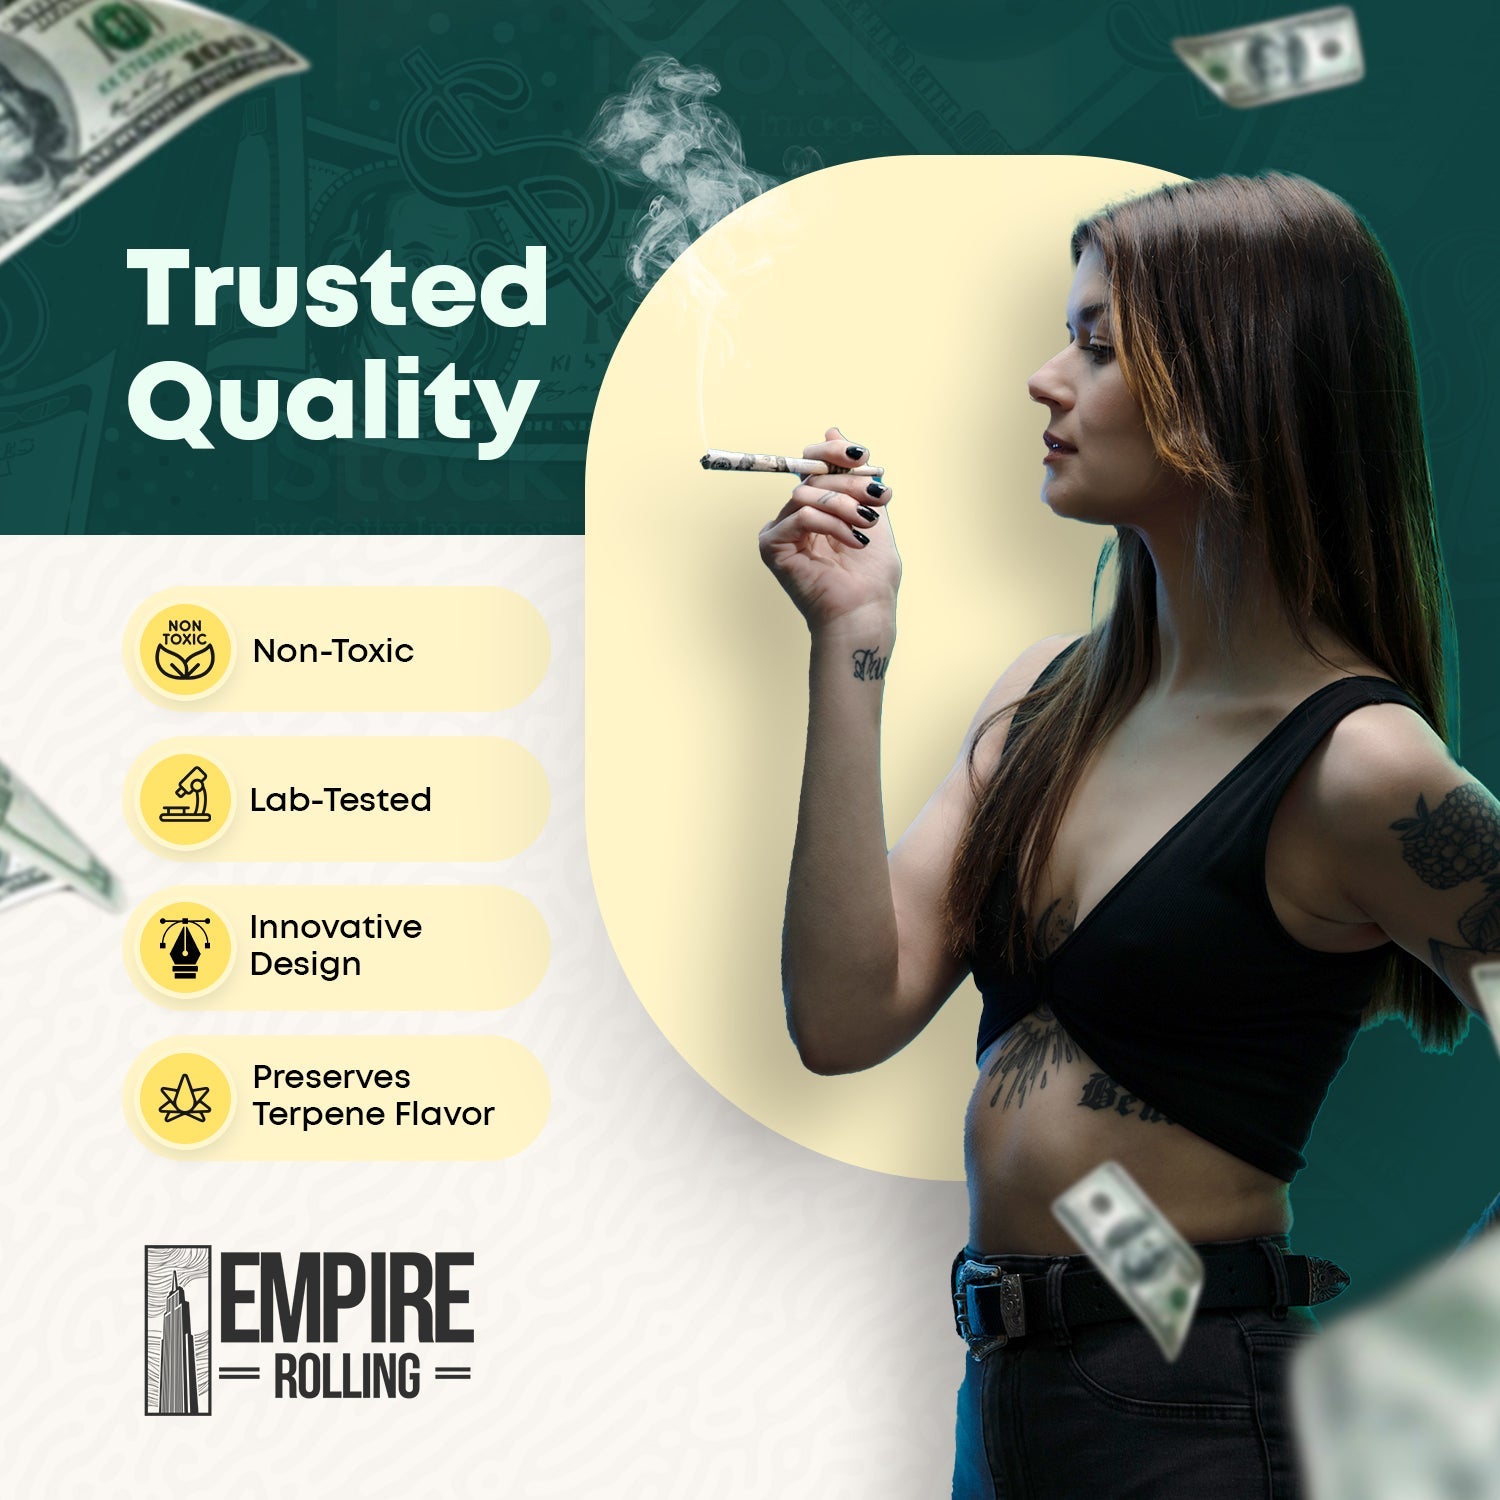 Empire Rolling's King Size Organic Hemp Rolling Papers, eco-friendly and crafted with high-quality, natural materials for a premium smoking experience.BENNY LITE Cones - Empire Rolling Papers